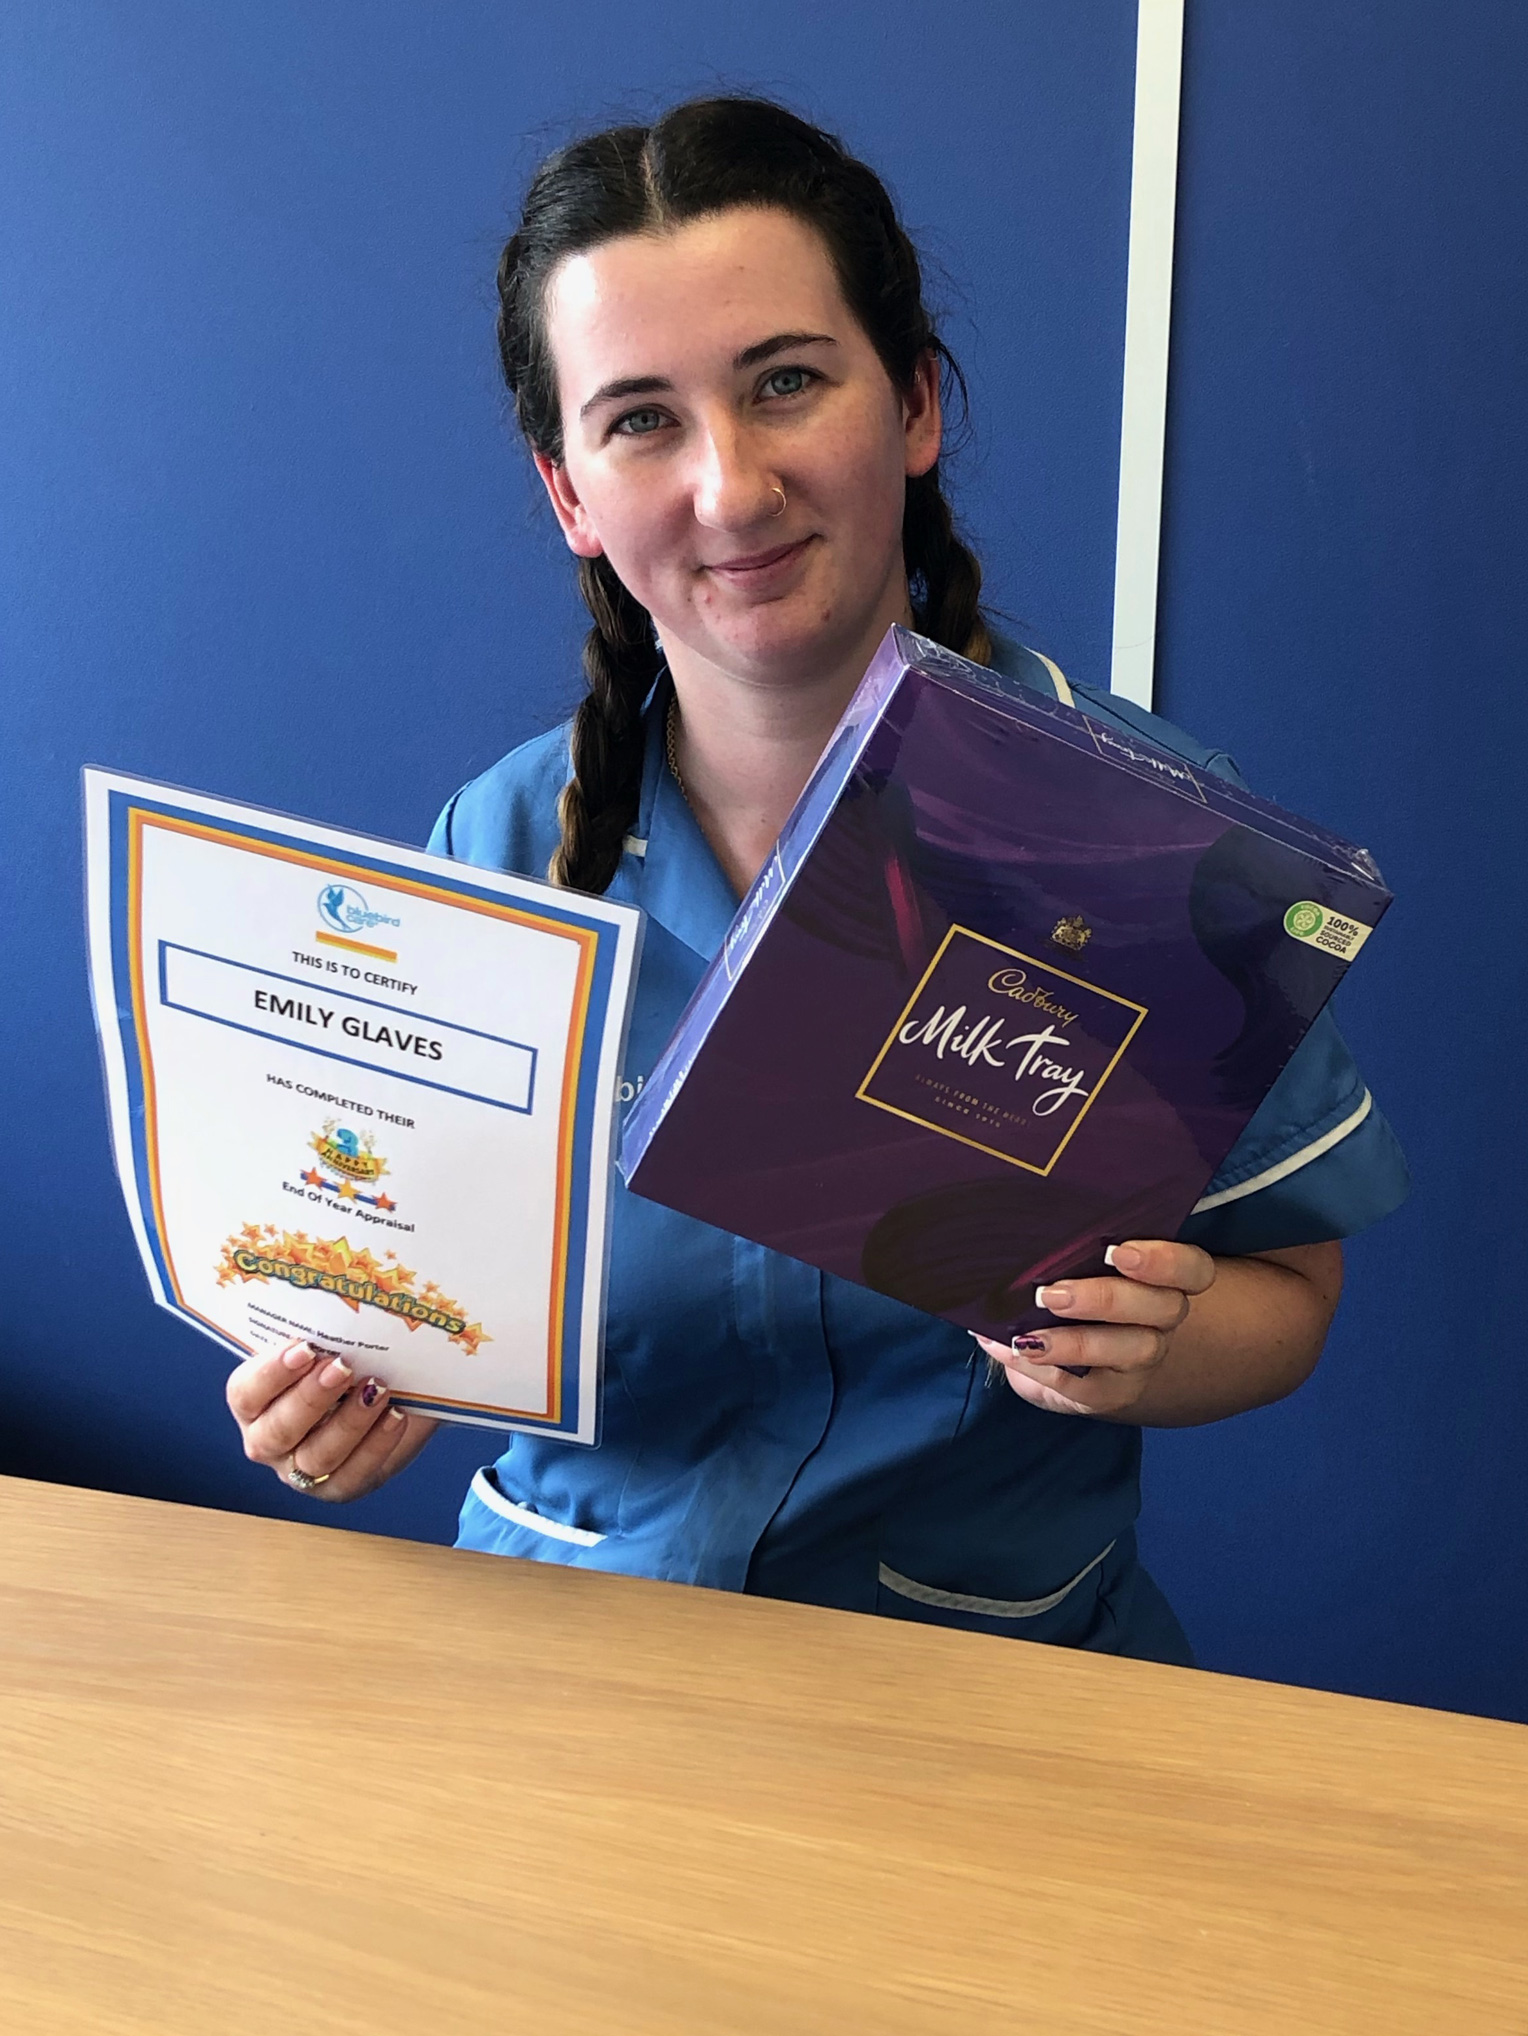 Emily Glaves, Newmarket and Fenland team member celebrating her 3rd year with Bluebird Care.